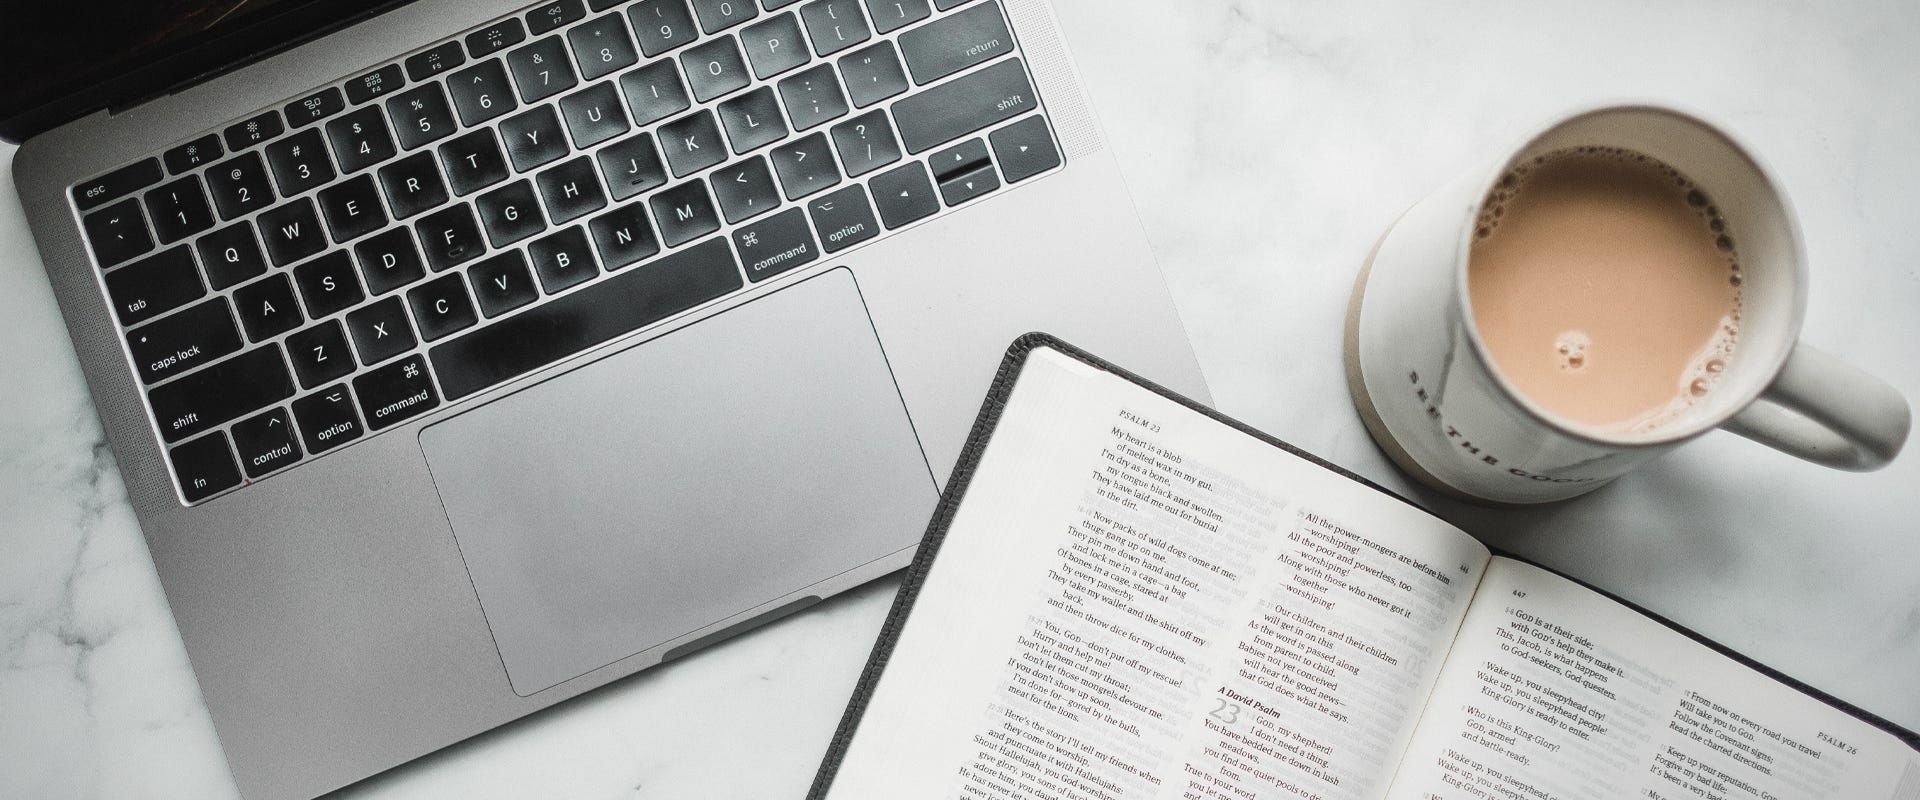 A laptop a bible and a cup of coffee